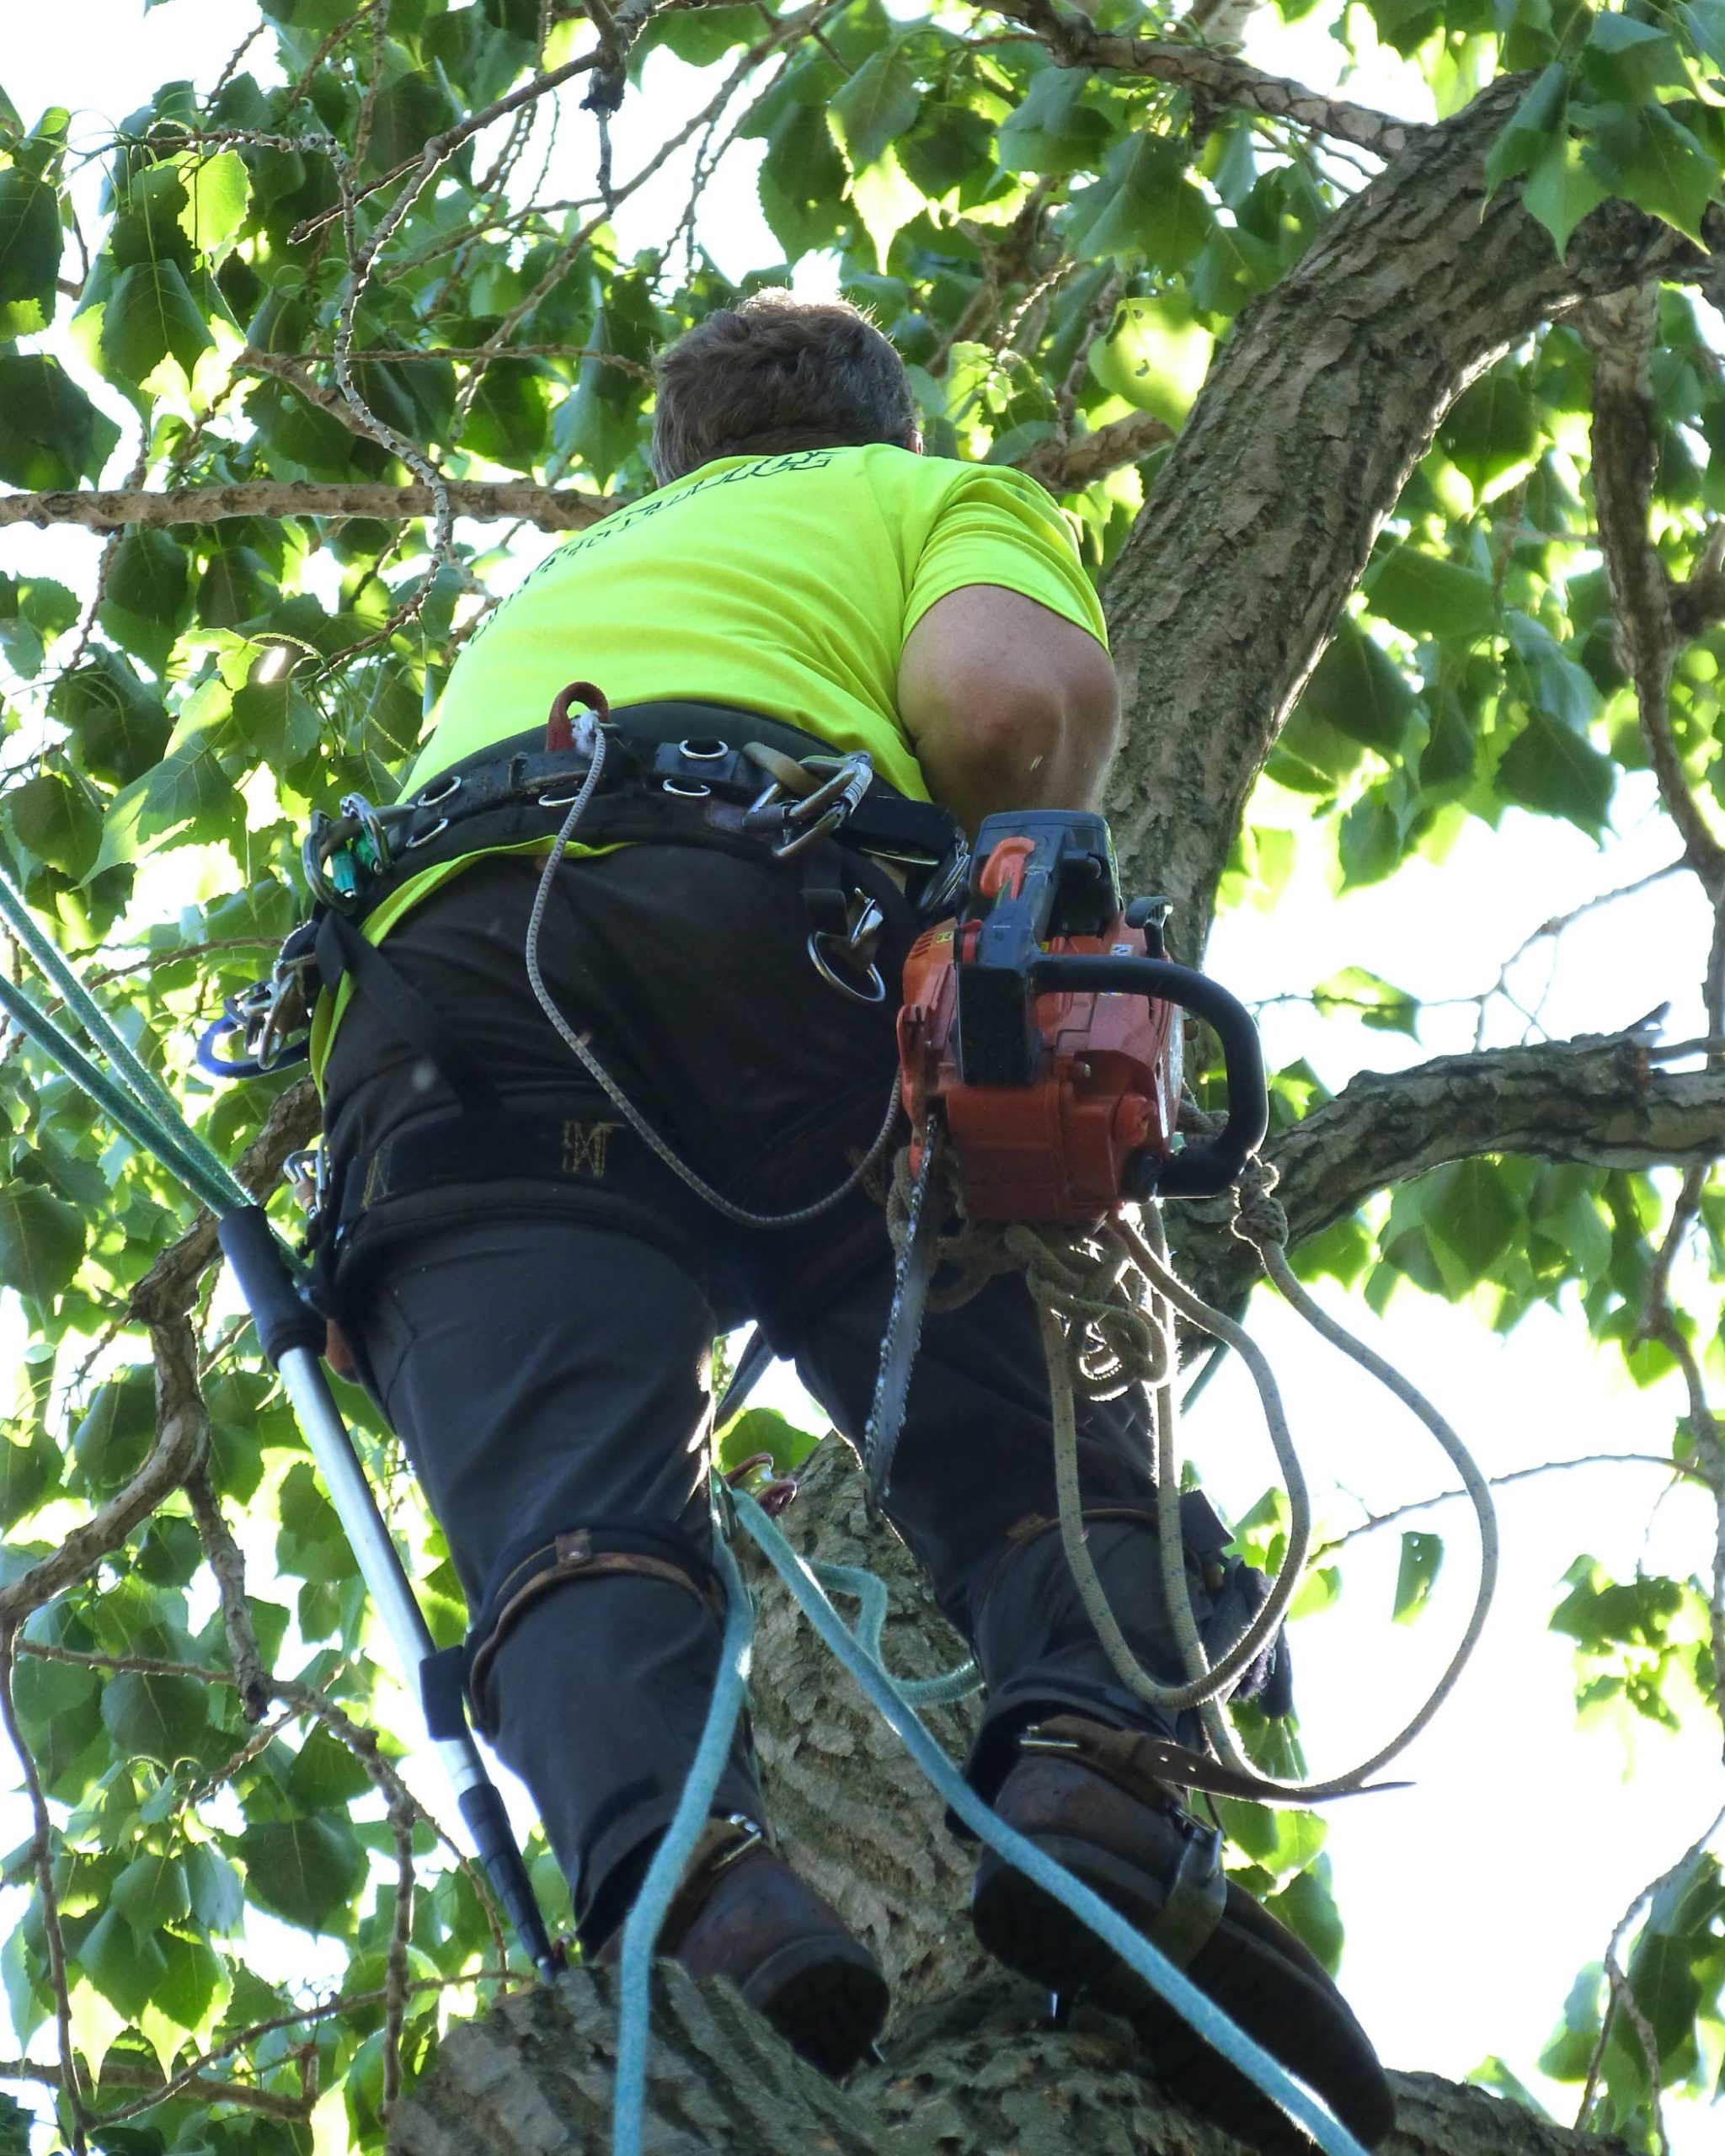 Beaver Dam Tree Service staff member scaling a tree to prepare it for removal while holding a chainsaw.